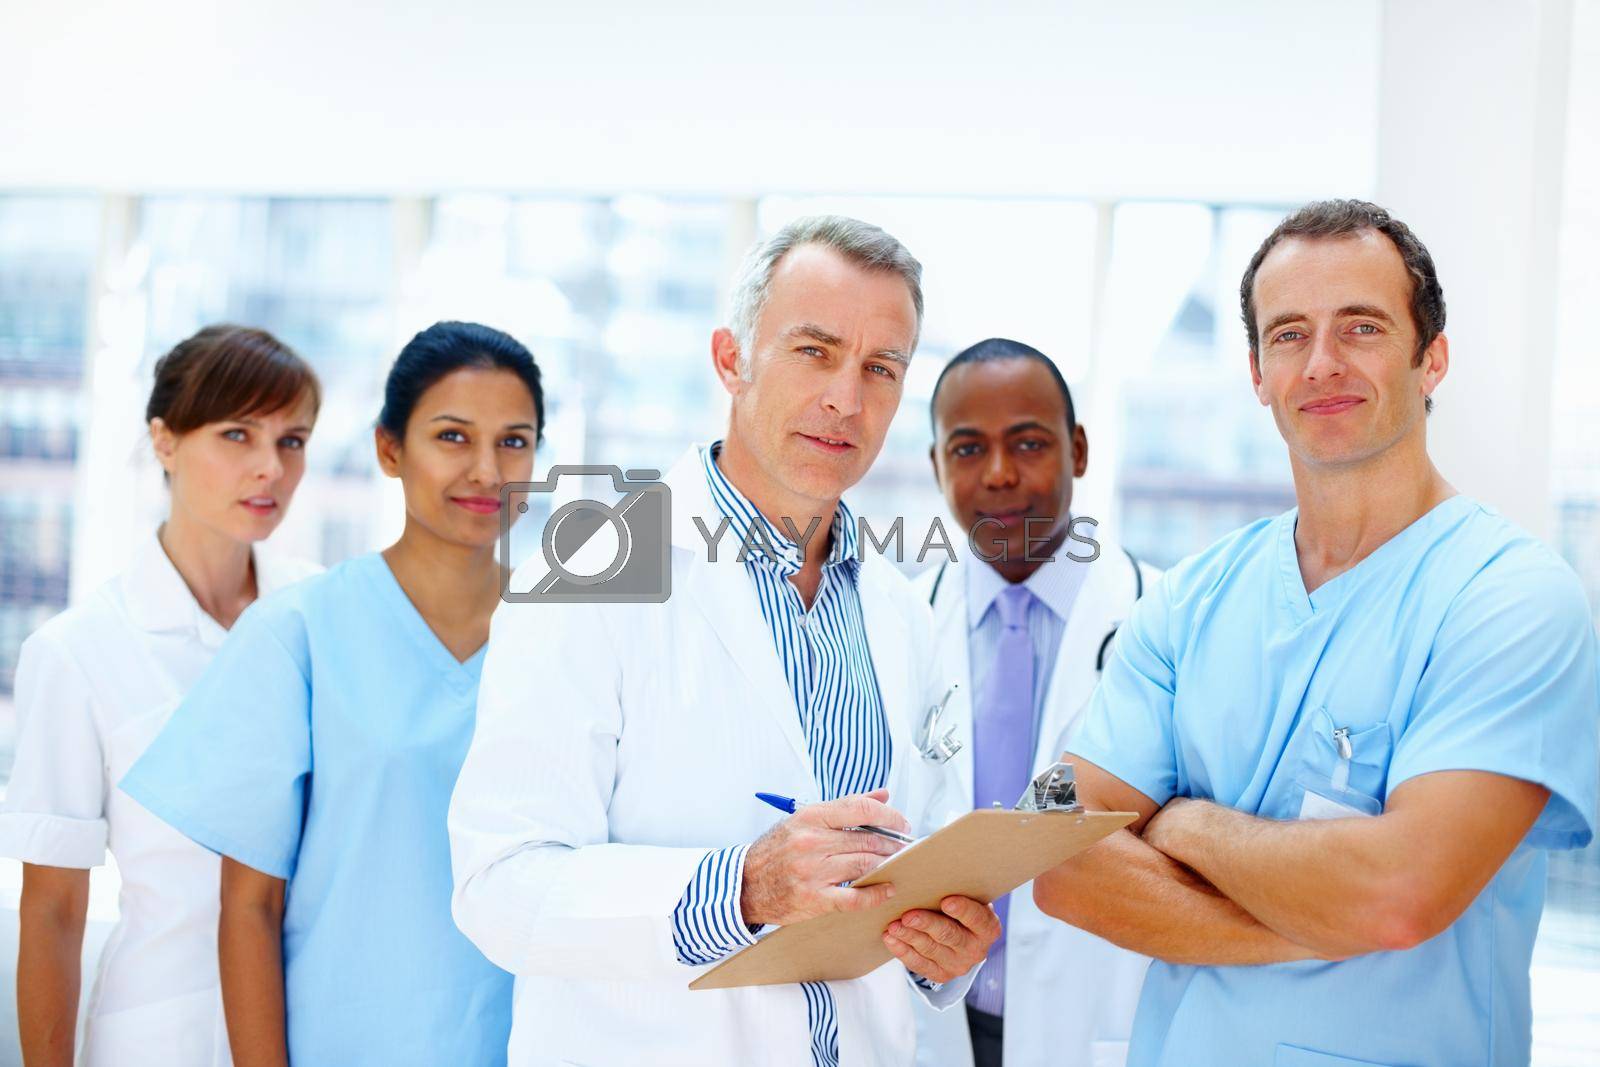 Diverse team of healthcare professionals looking serious.